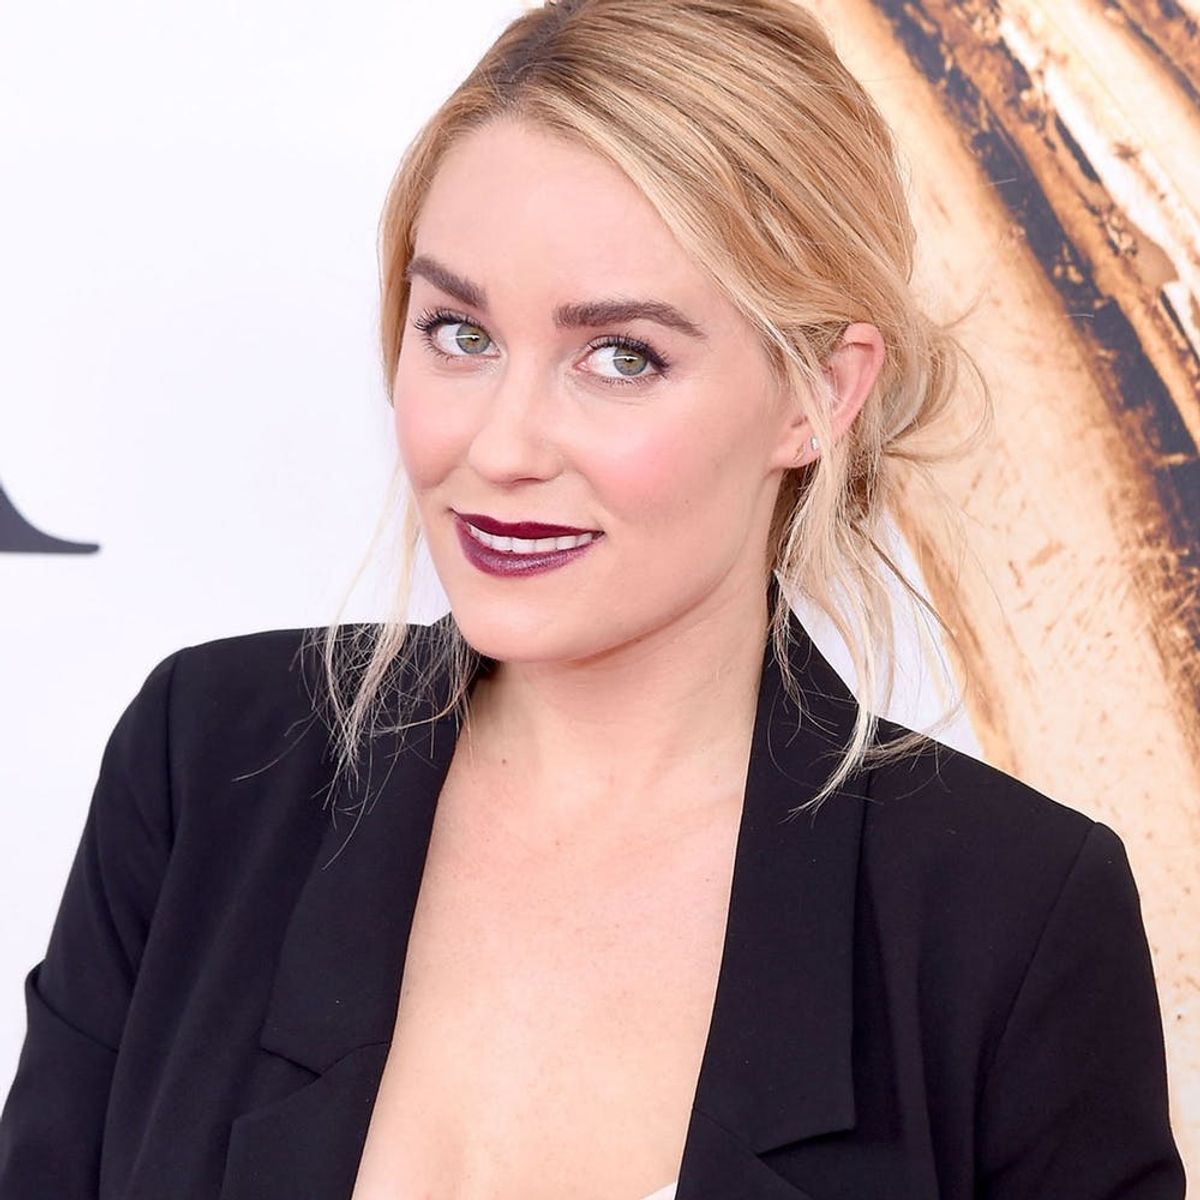 Lauren Conrad Just Channeled the New Taylor Swift on the Red Carpet